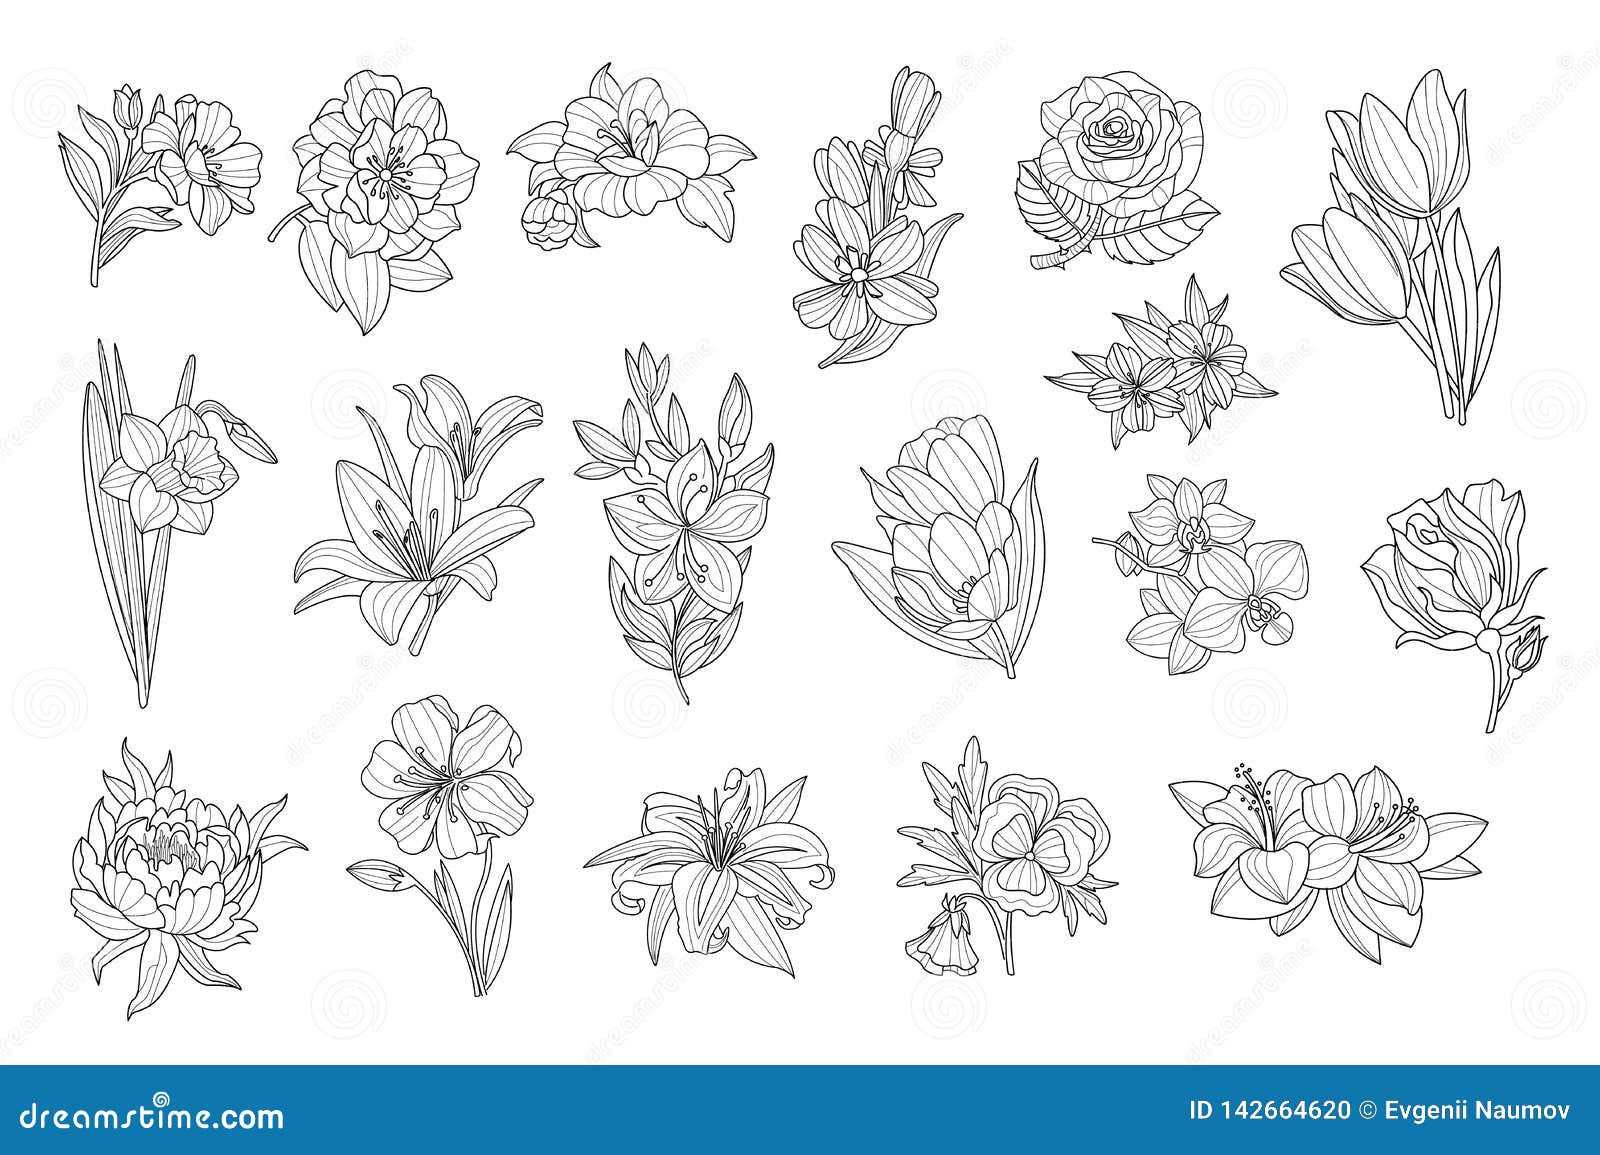 daffodil tattoo black and white  Clip Art Library